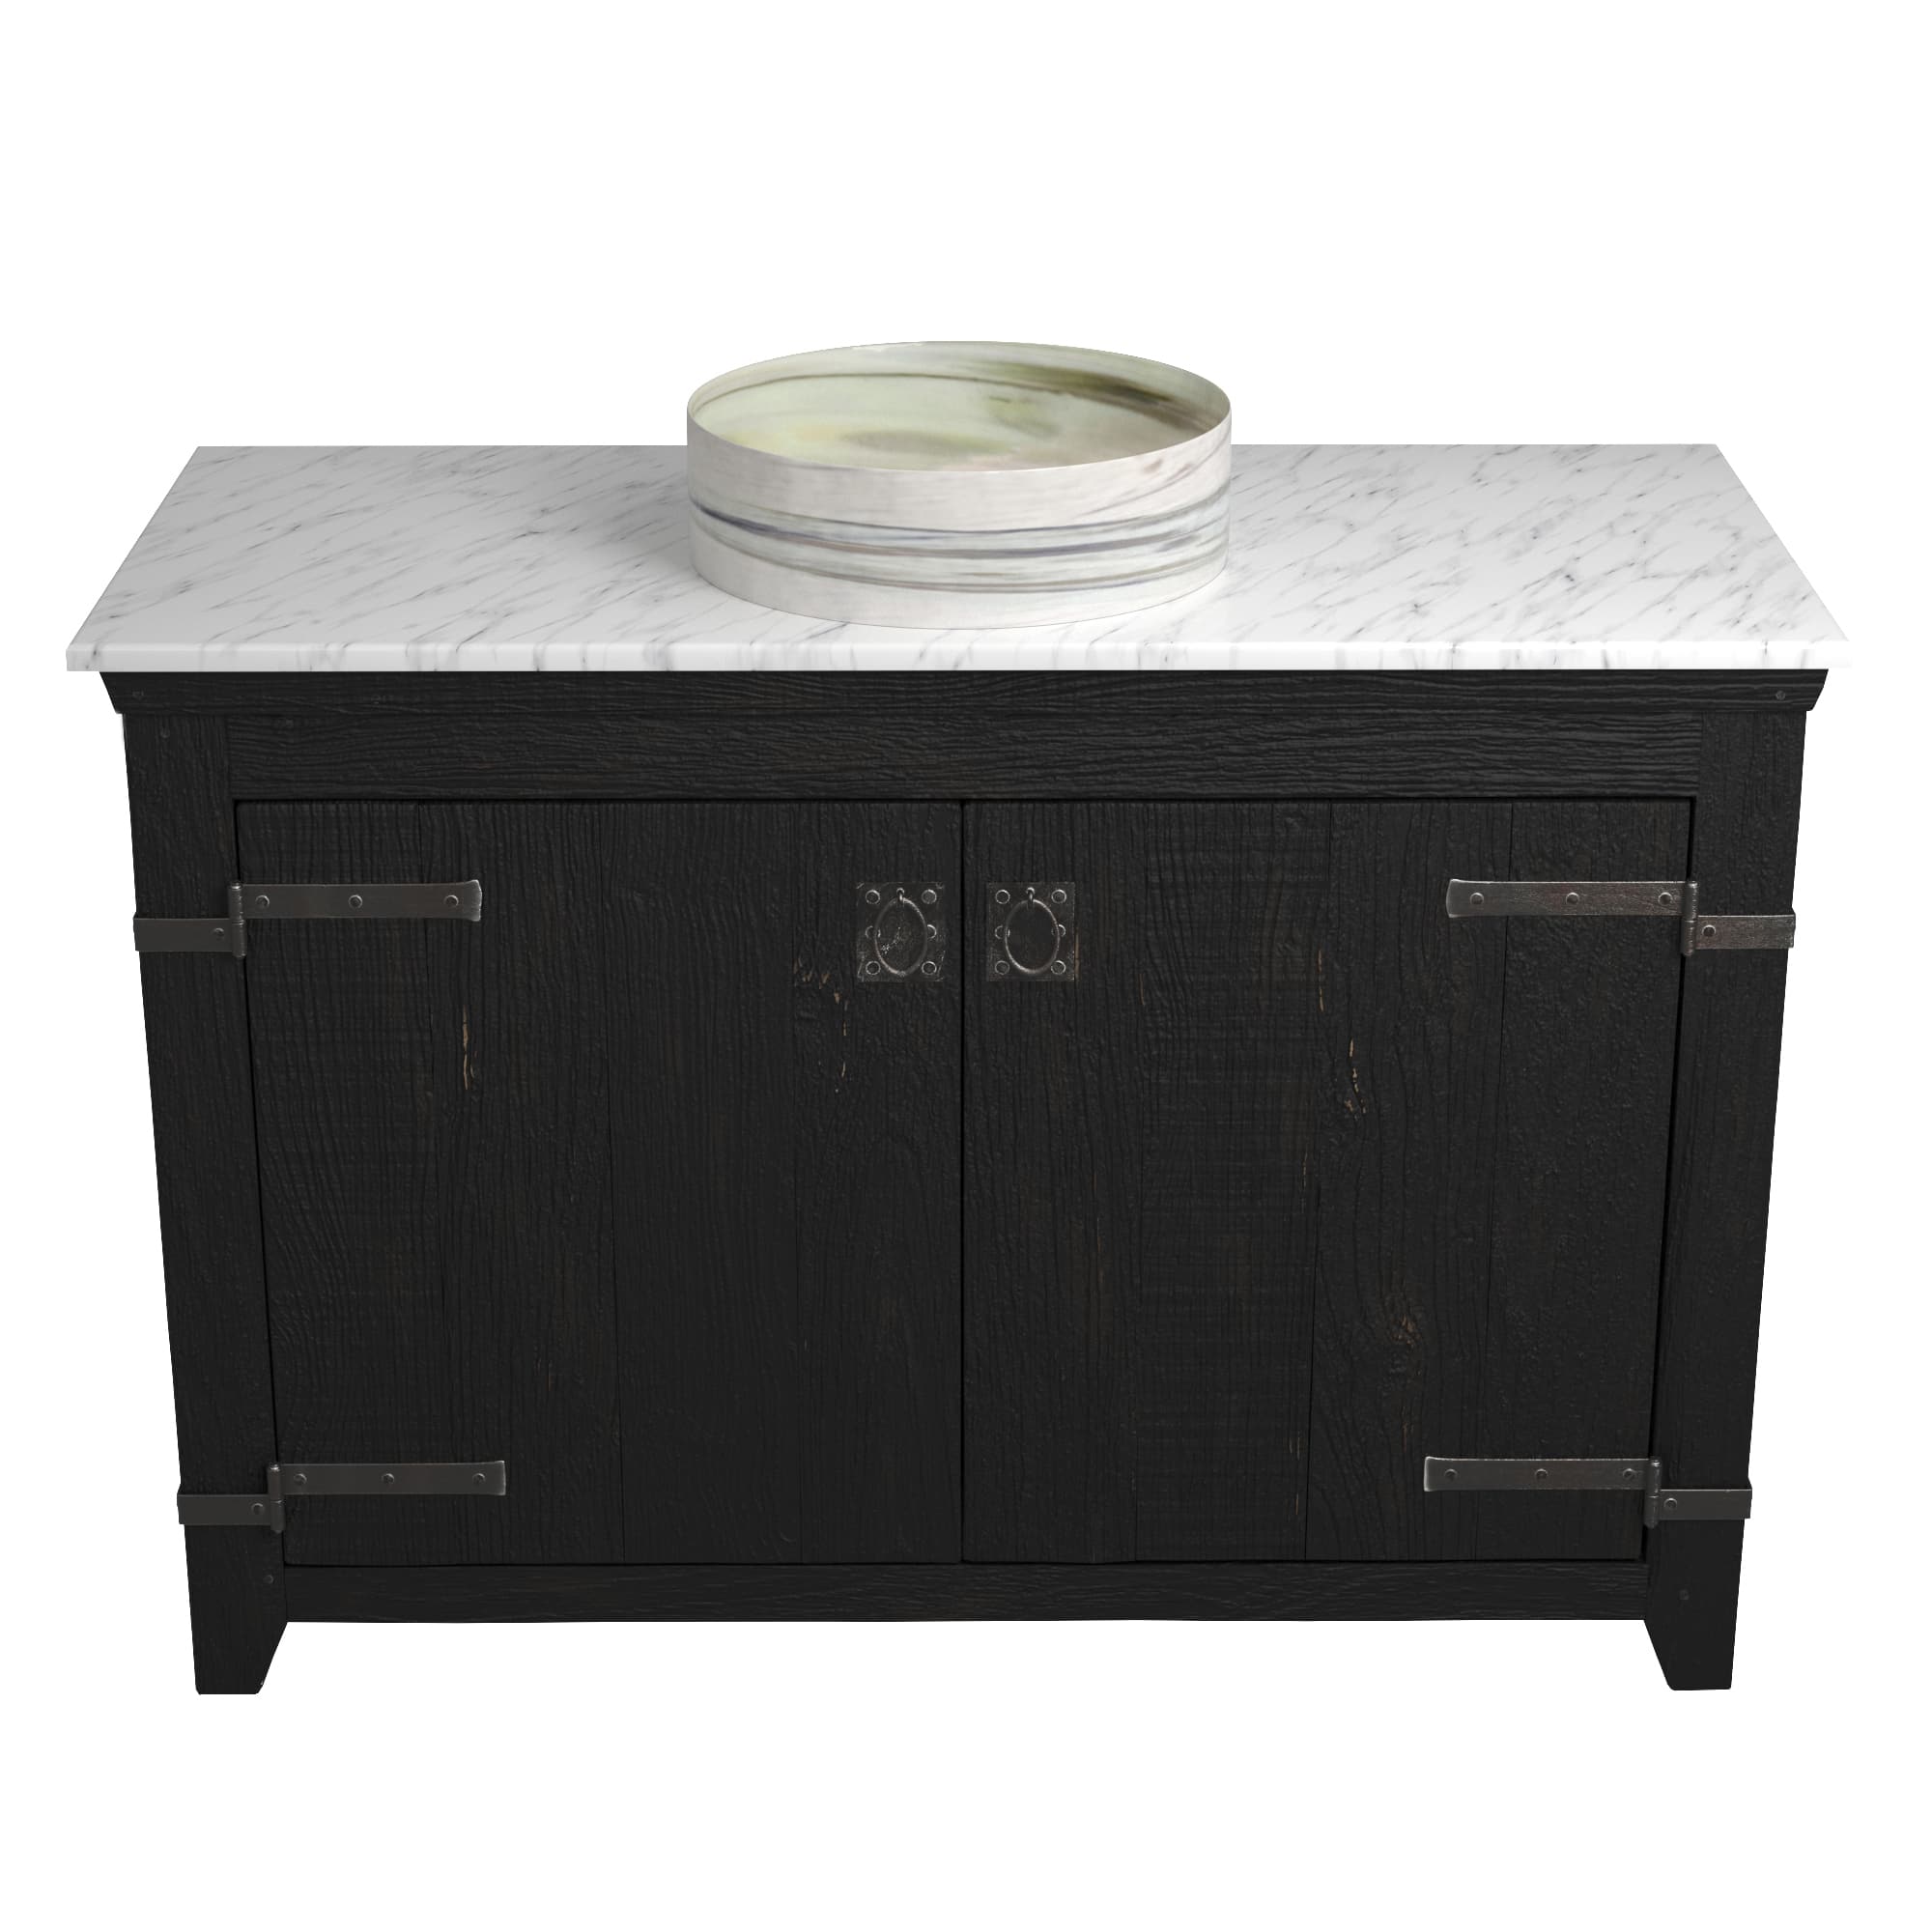 Native Trails 48" Americana Vanity in Anvil with Carrara Marble Top and Positano in Abalone, Single Faucet Hole, BND48-VB-CT-MG-037